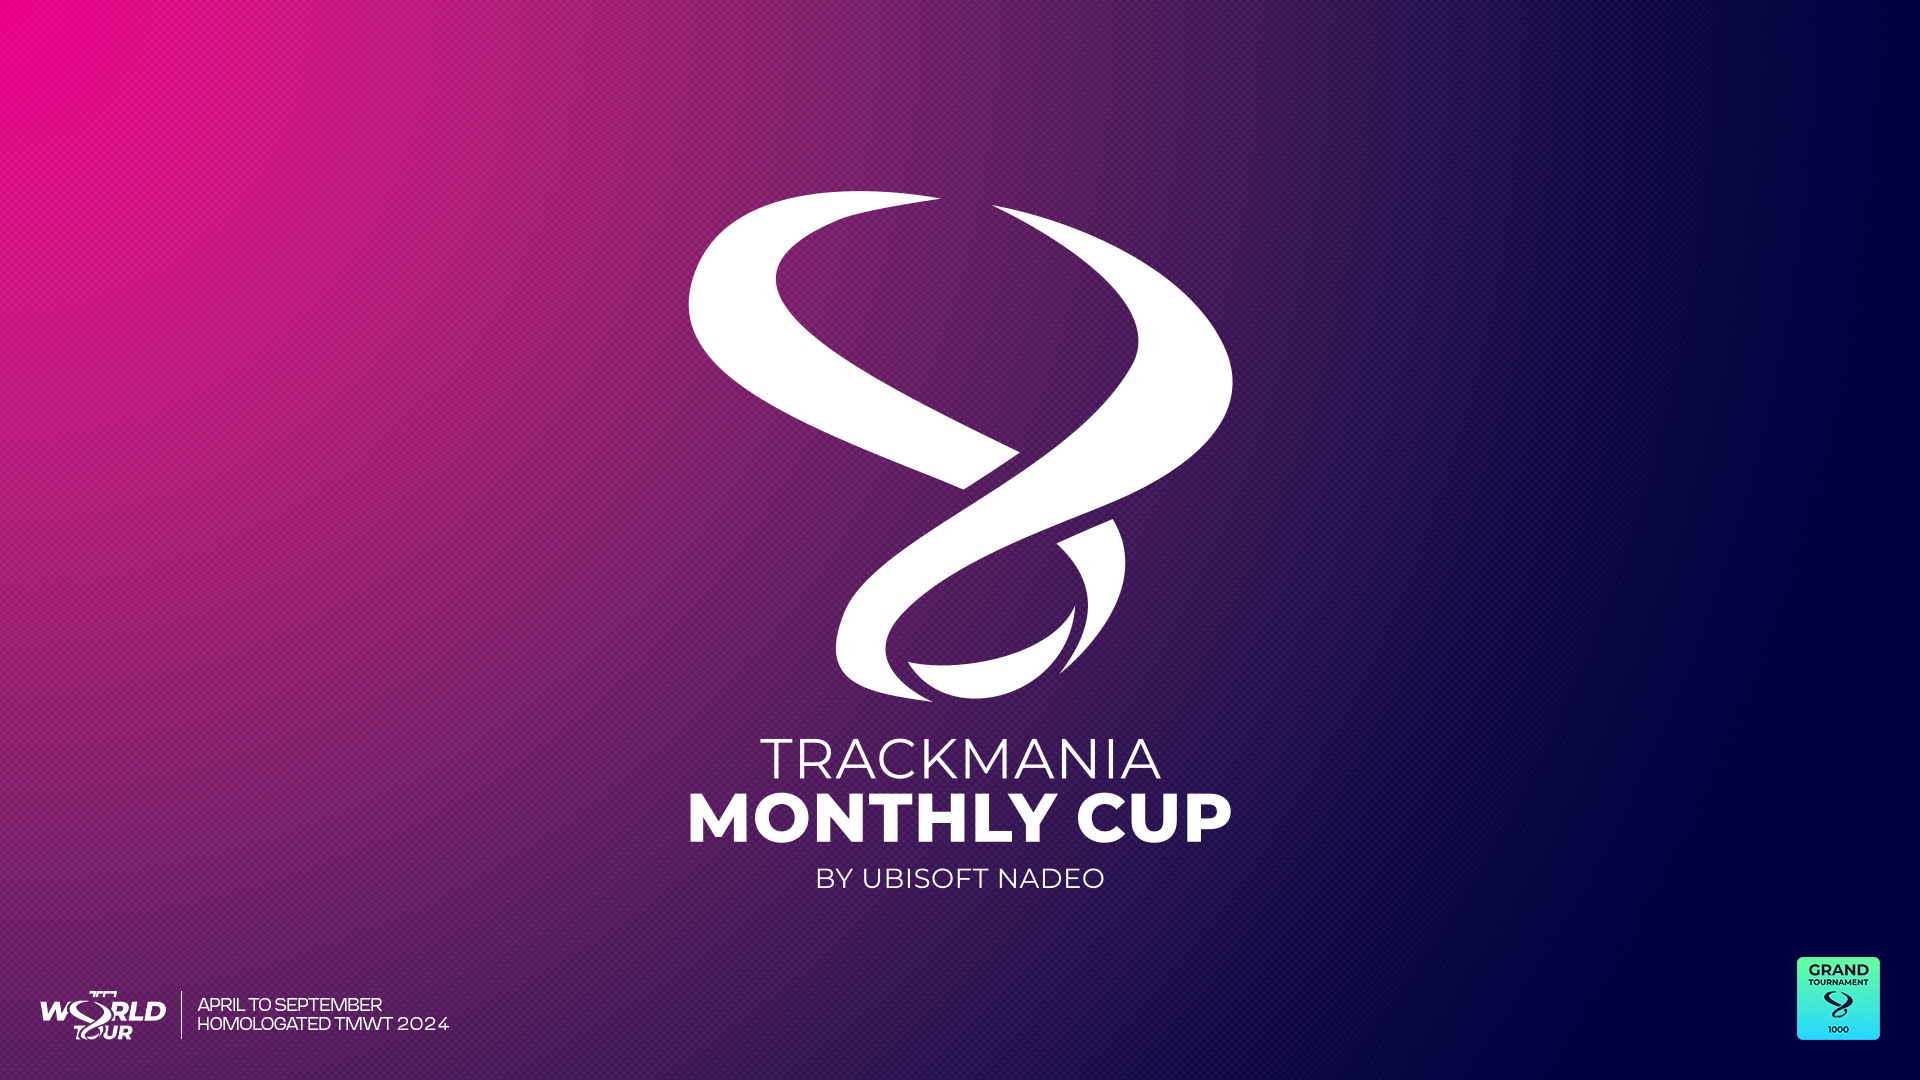 Trackmania Monthly Cups introduction